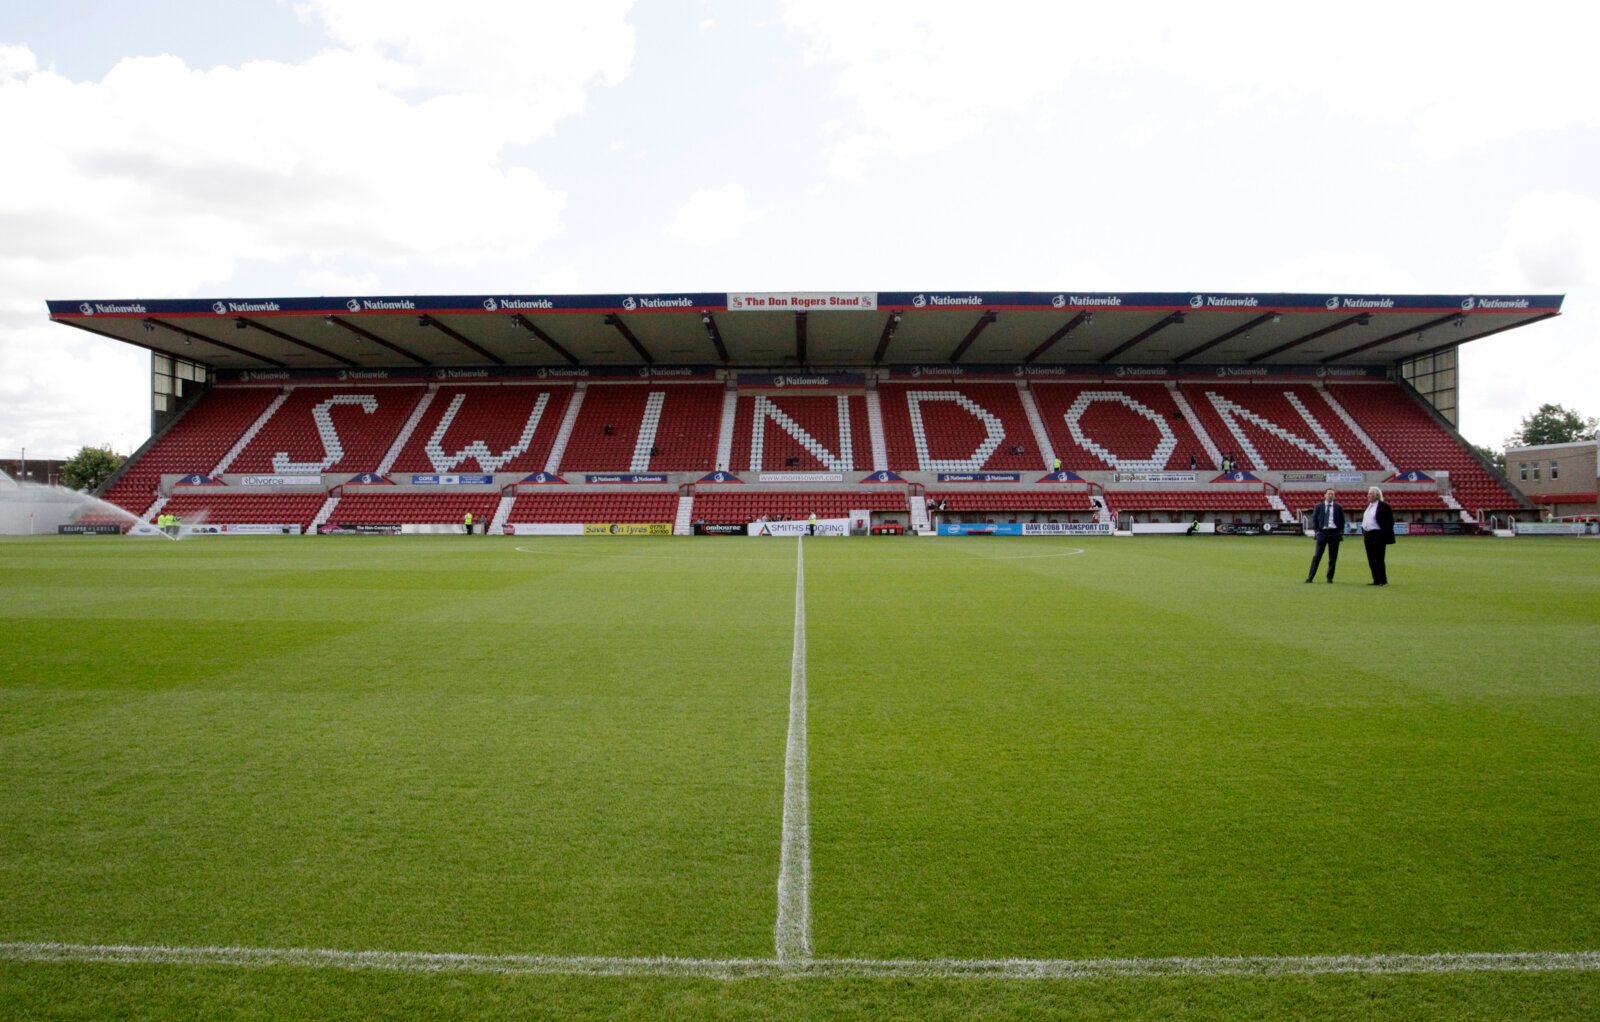 Football - Swindon Town v West Bromwich Albion - Pre Season Friendly - The County Ground - 15/16 - 25/7/15 
General view inside the ground before the game 
Mandatory Credit: Action Images / Ian Smith 
EDITORIAL USE ONLY.